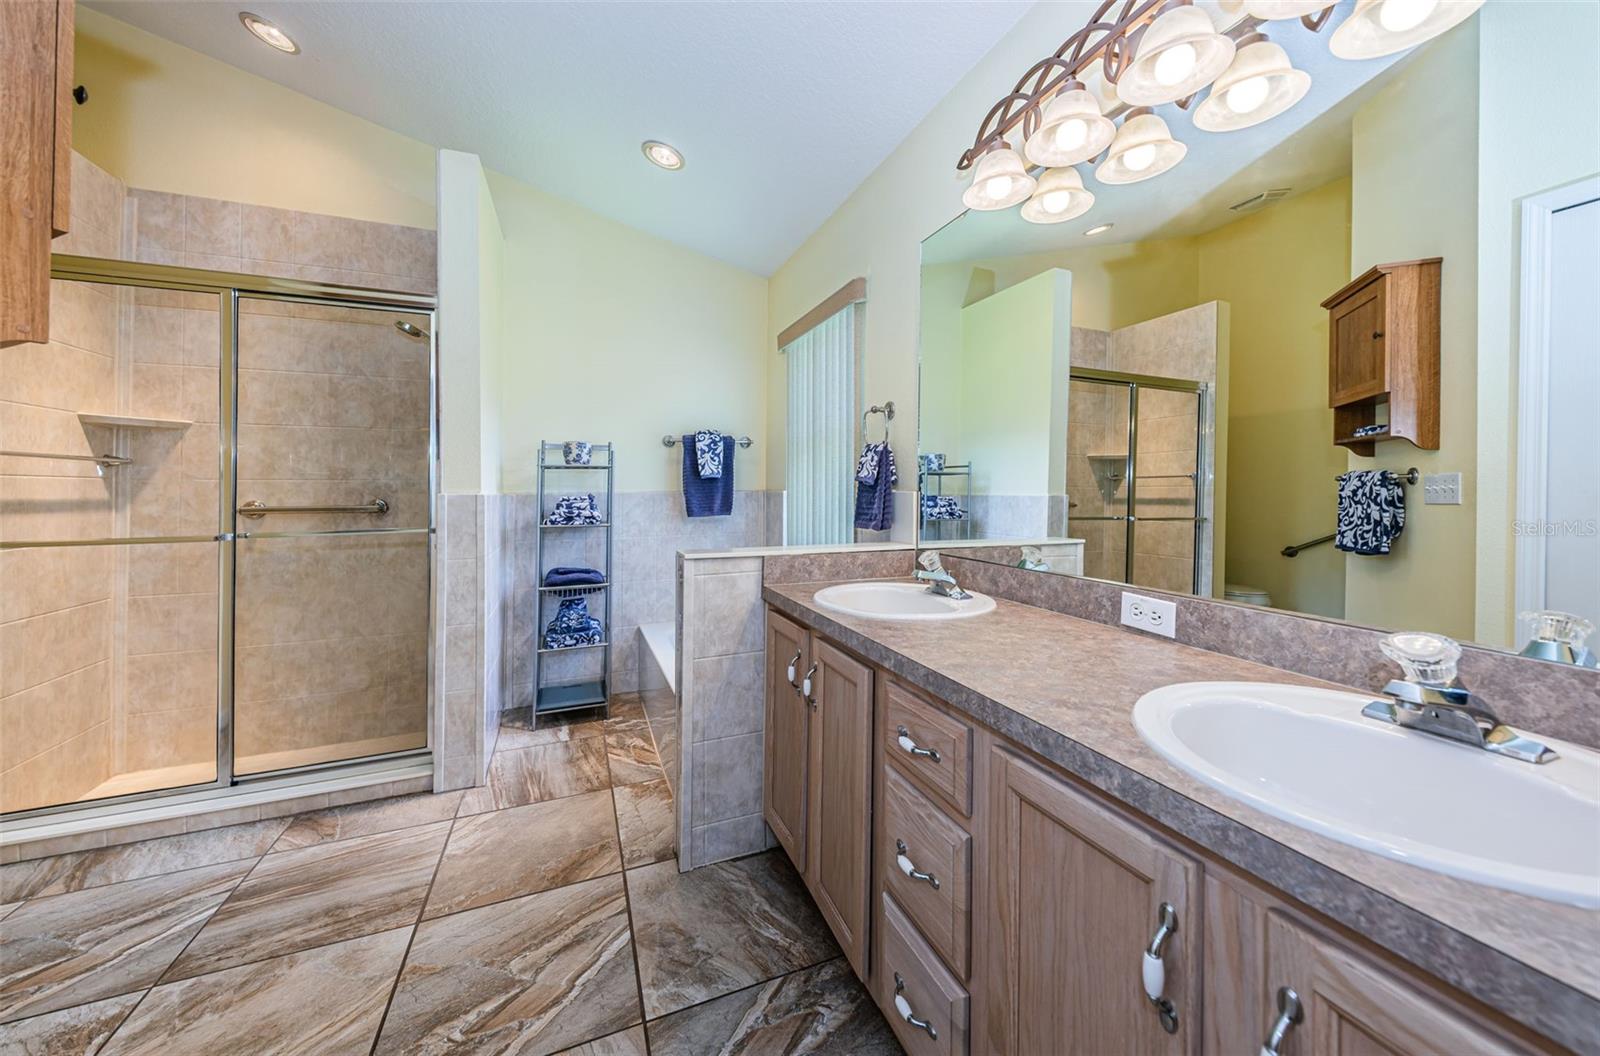 Double sinks in the master suite